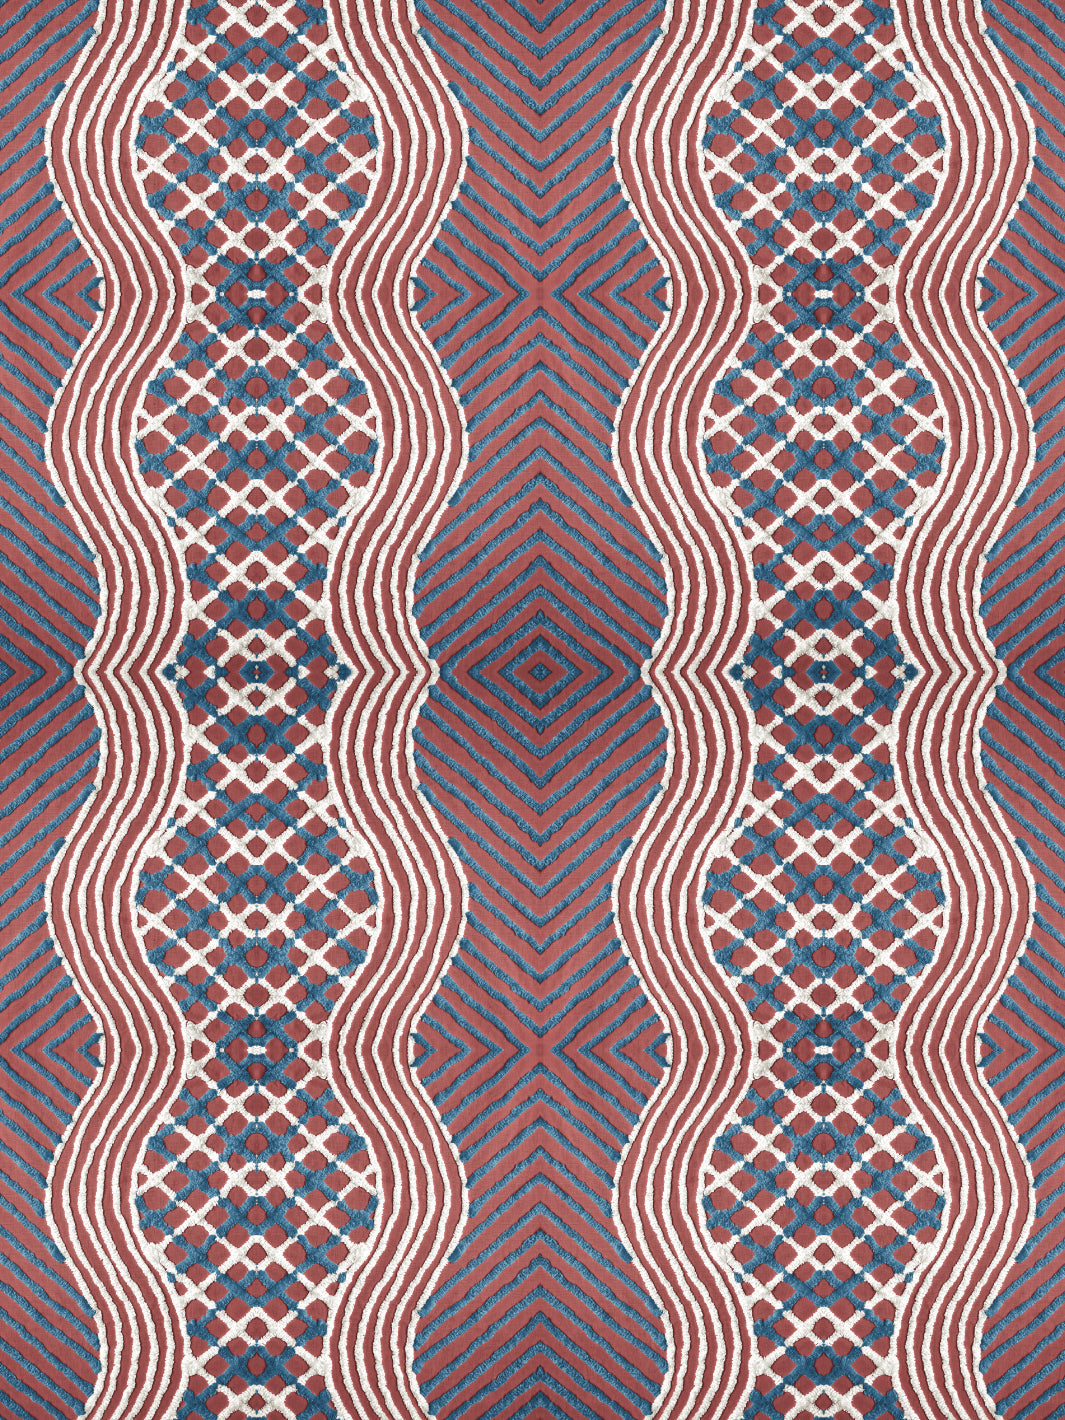 'Chenille Stripe' Wallpaper by Chris Benz - Red White + Blue